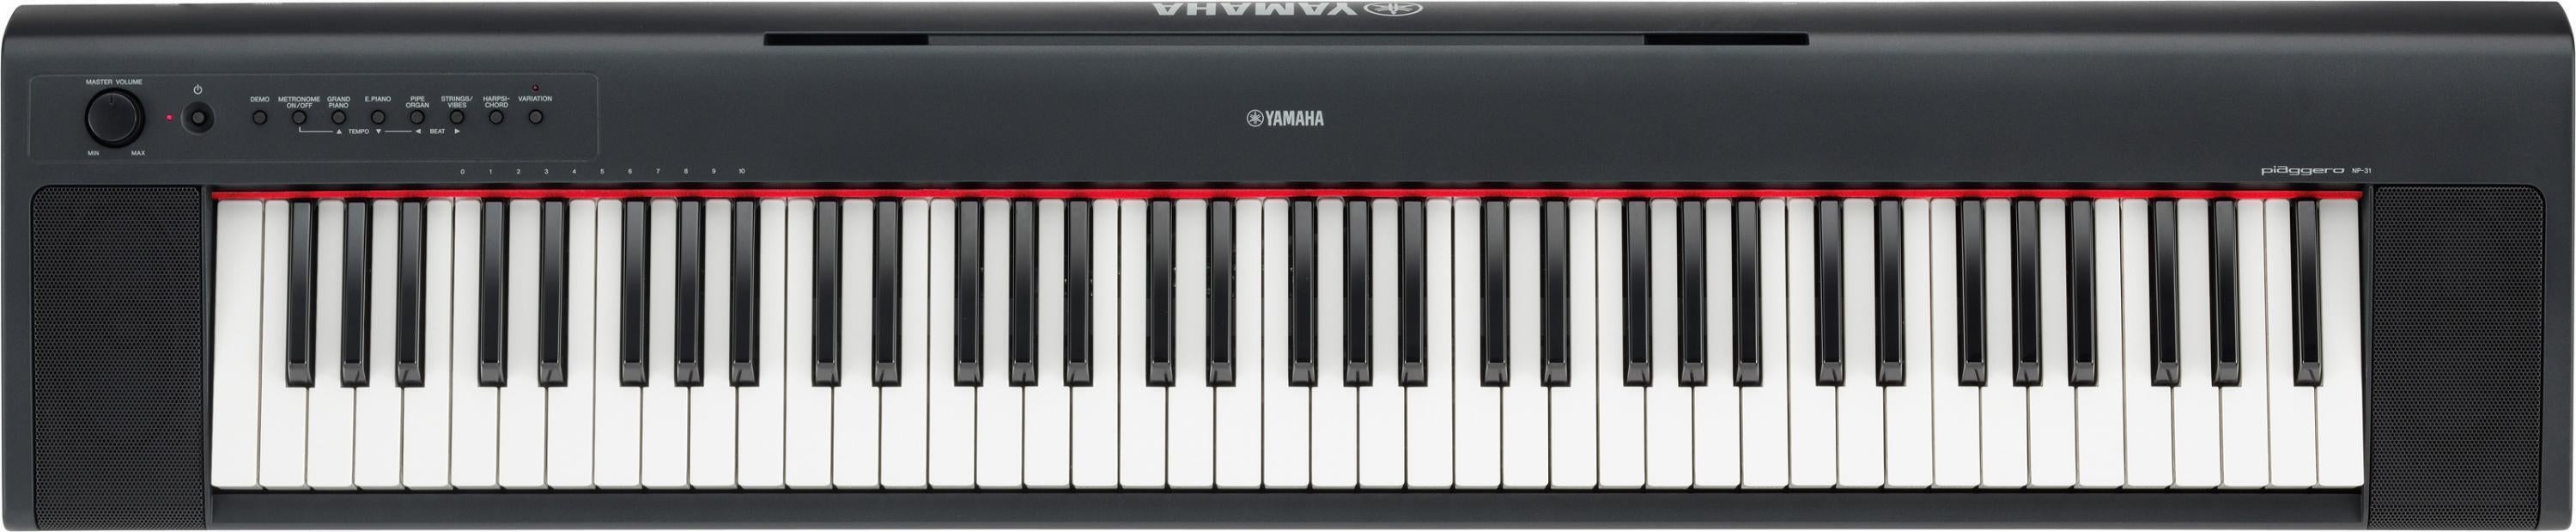 Yamaha Piaggero NP-31 76-Key Piano with Speakers | Sweetwater